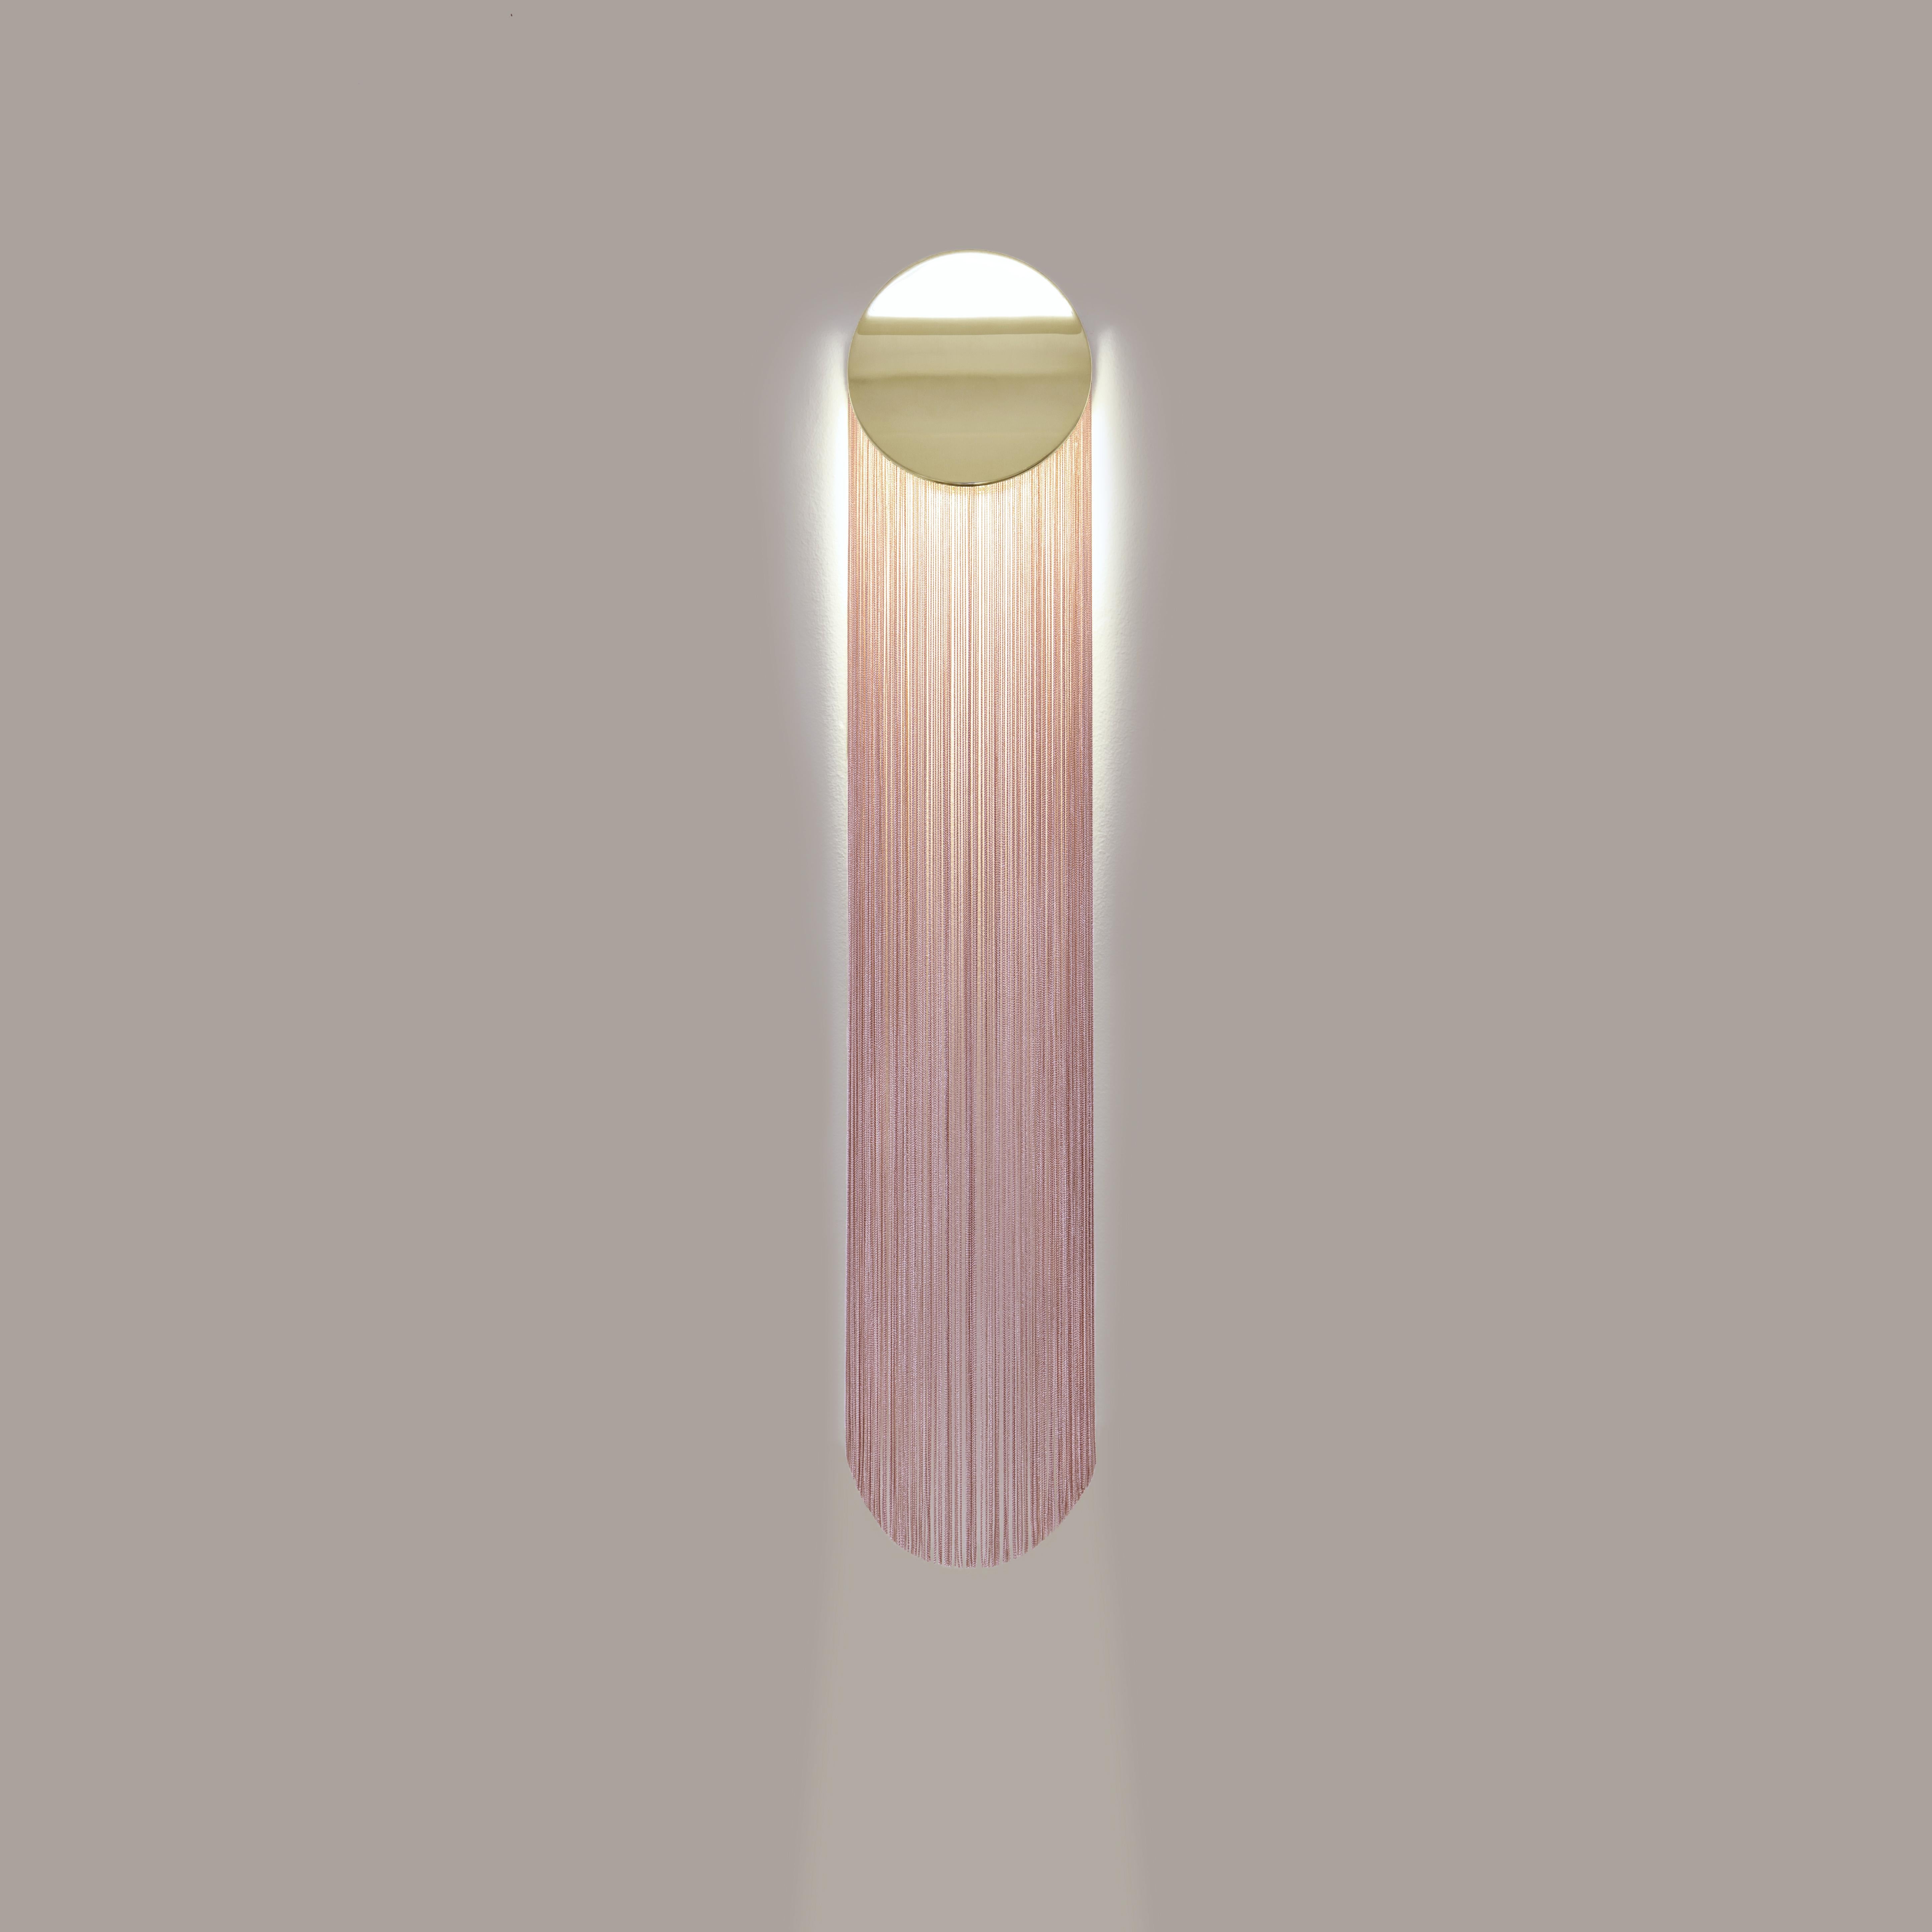 Cé Petite is a contemporary wall sconce with fringes and soft curves.

Cé jostles the obvious association between fringes and lighting by unveiling a classic revisited. The inspiration came from Cécrops, who would be the first native, the founder